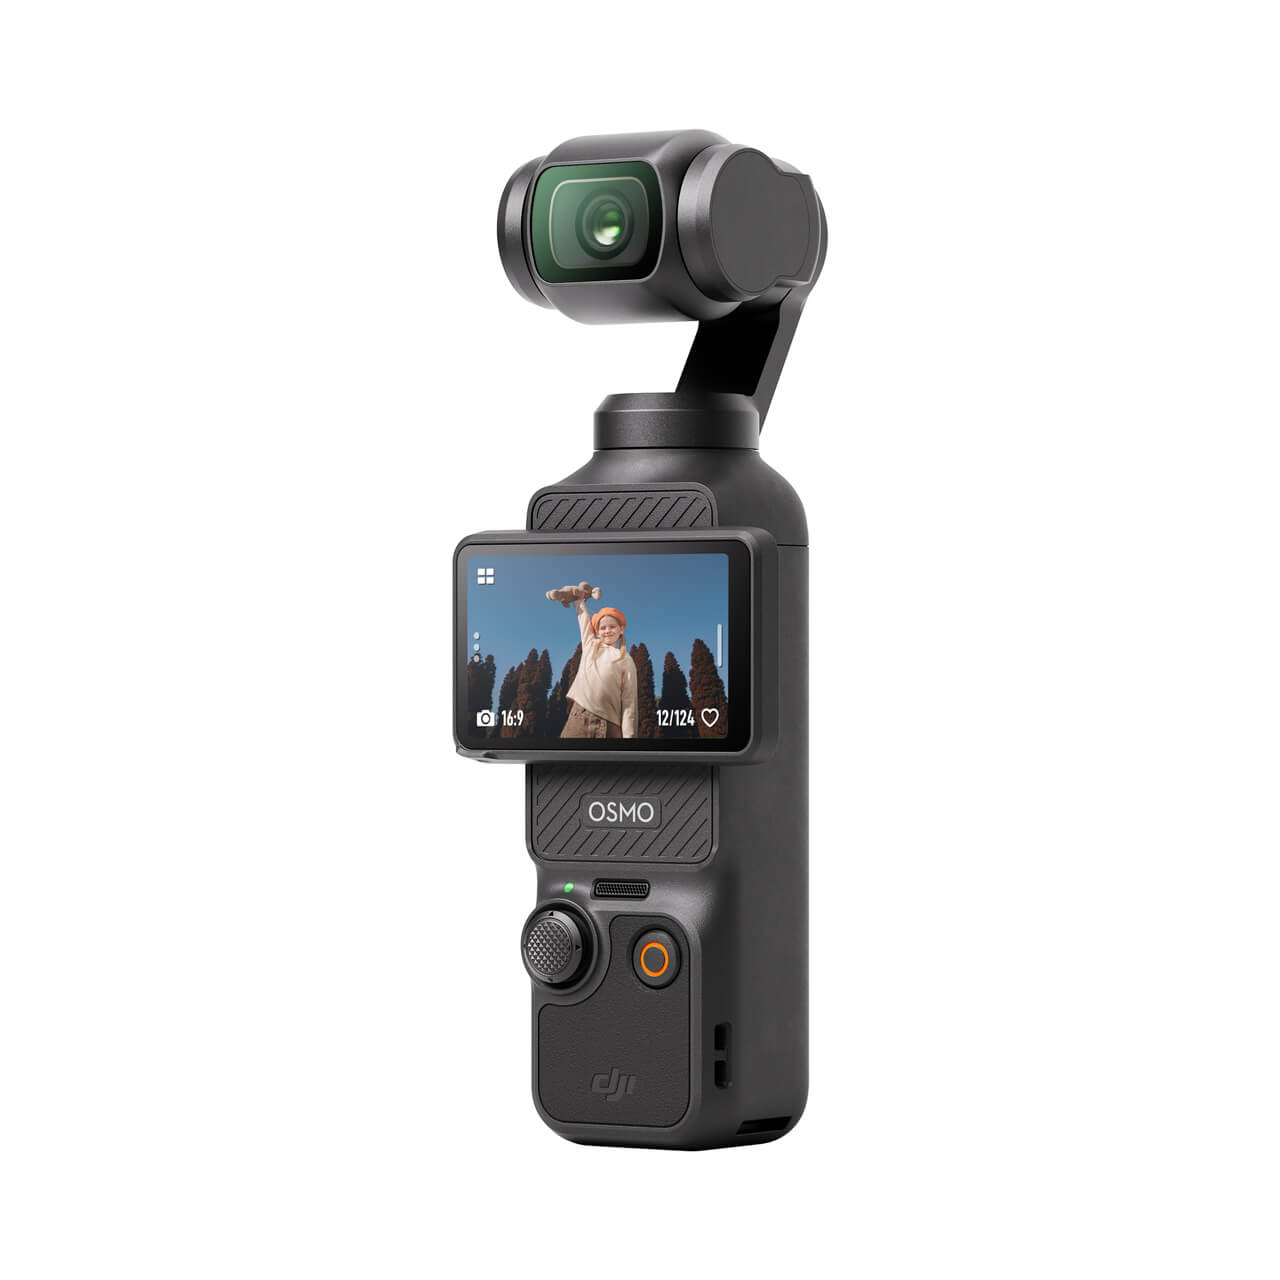 handheld Osmo Pocket 3 gimbal with built in 4k camera